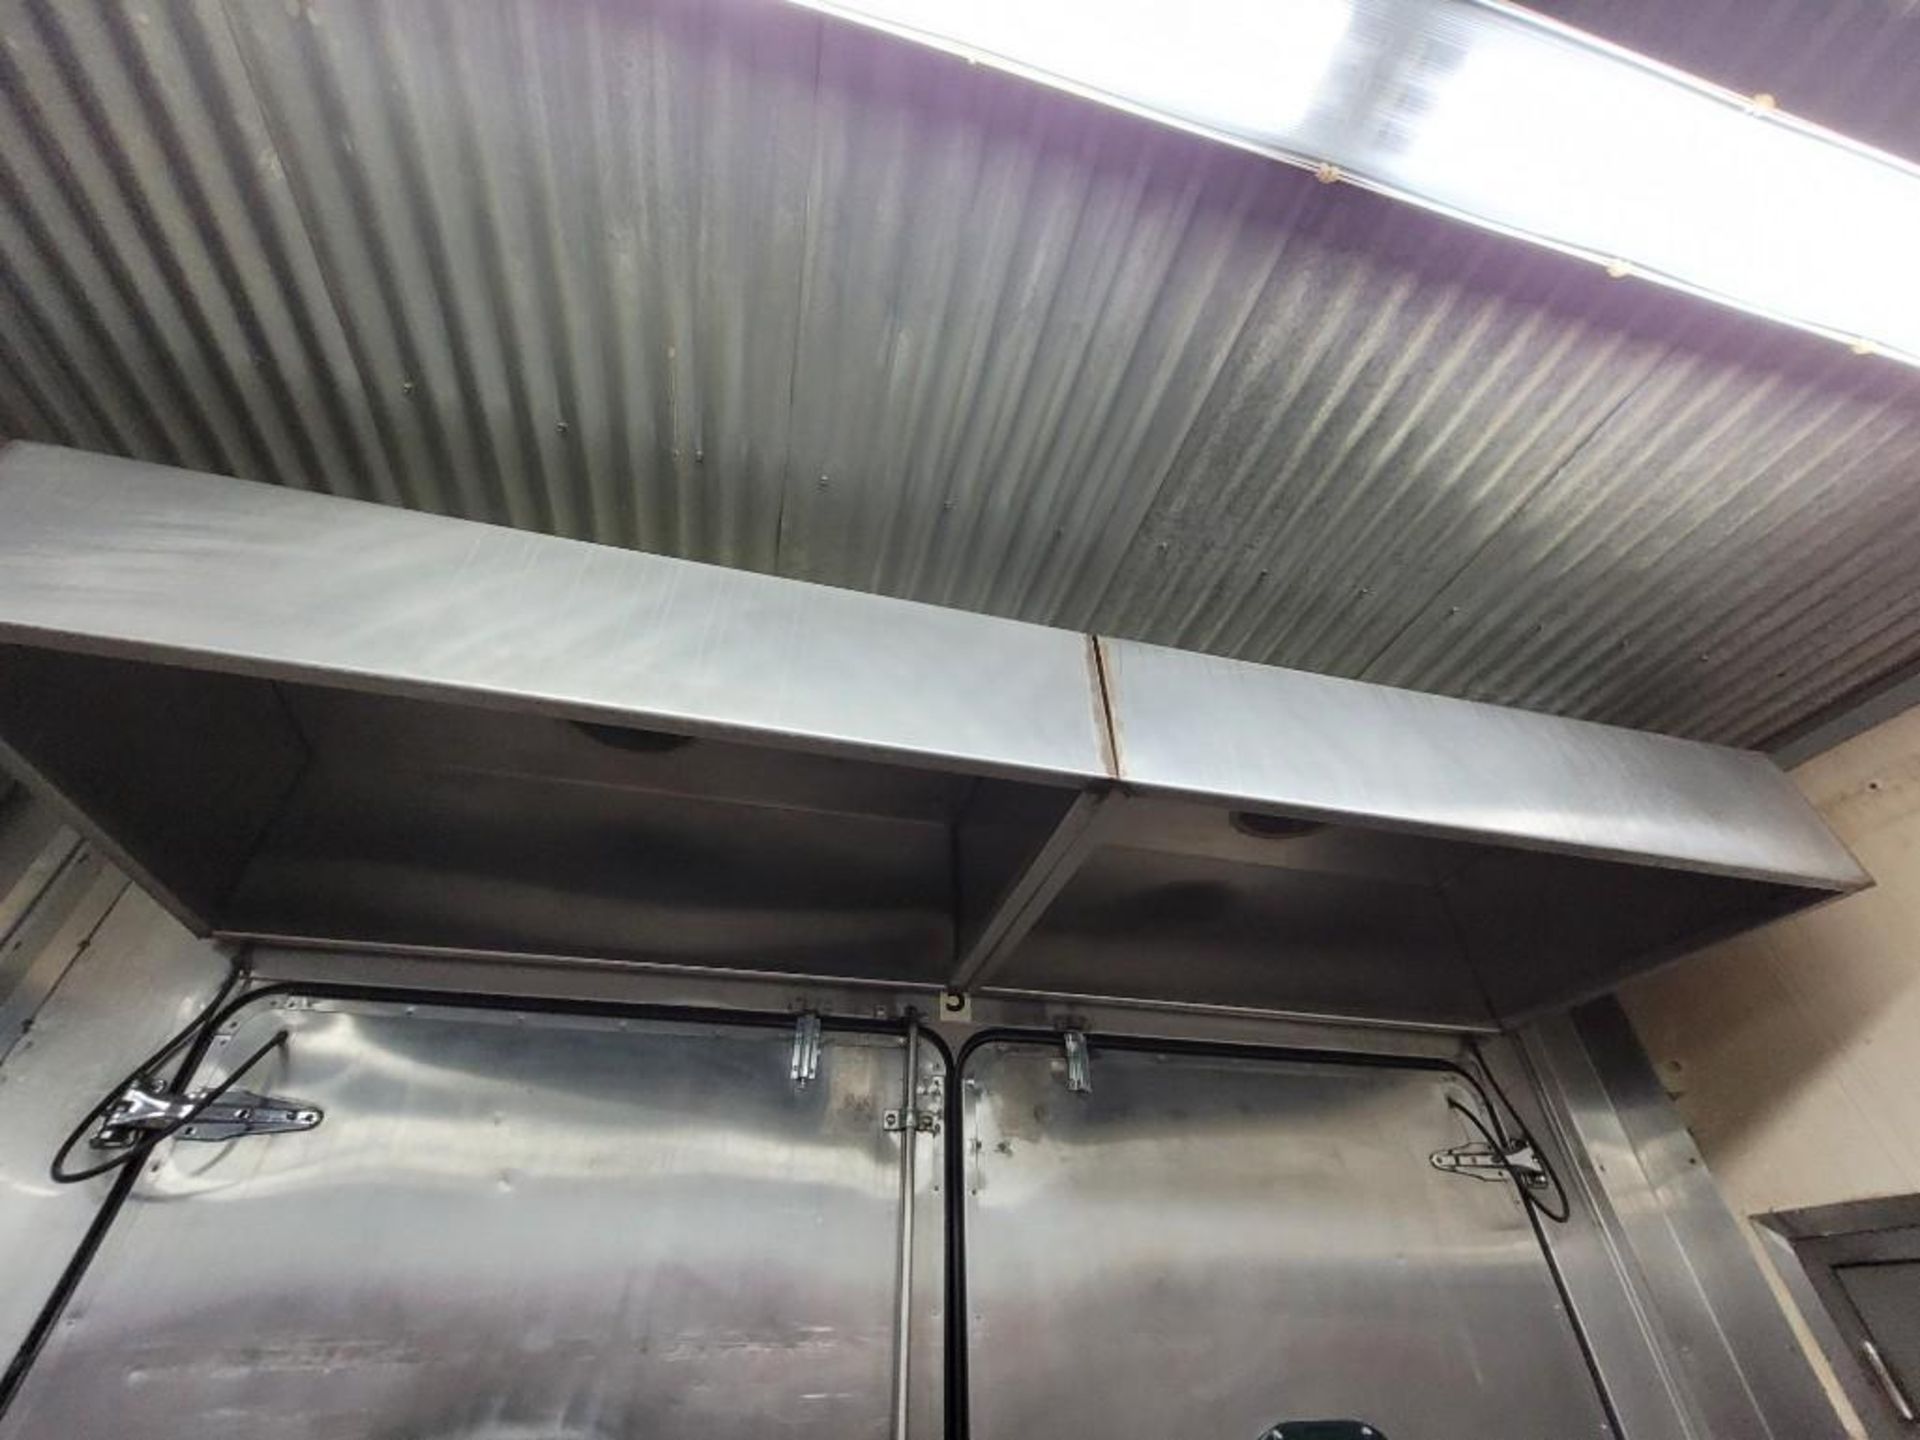 Two Stainless Dual Exhaust Hoods - Image 2 of 2